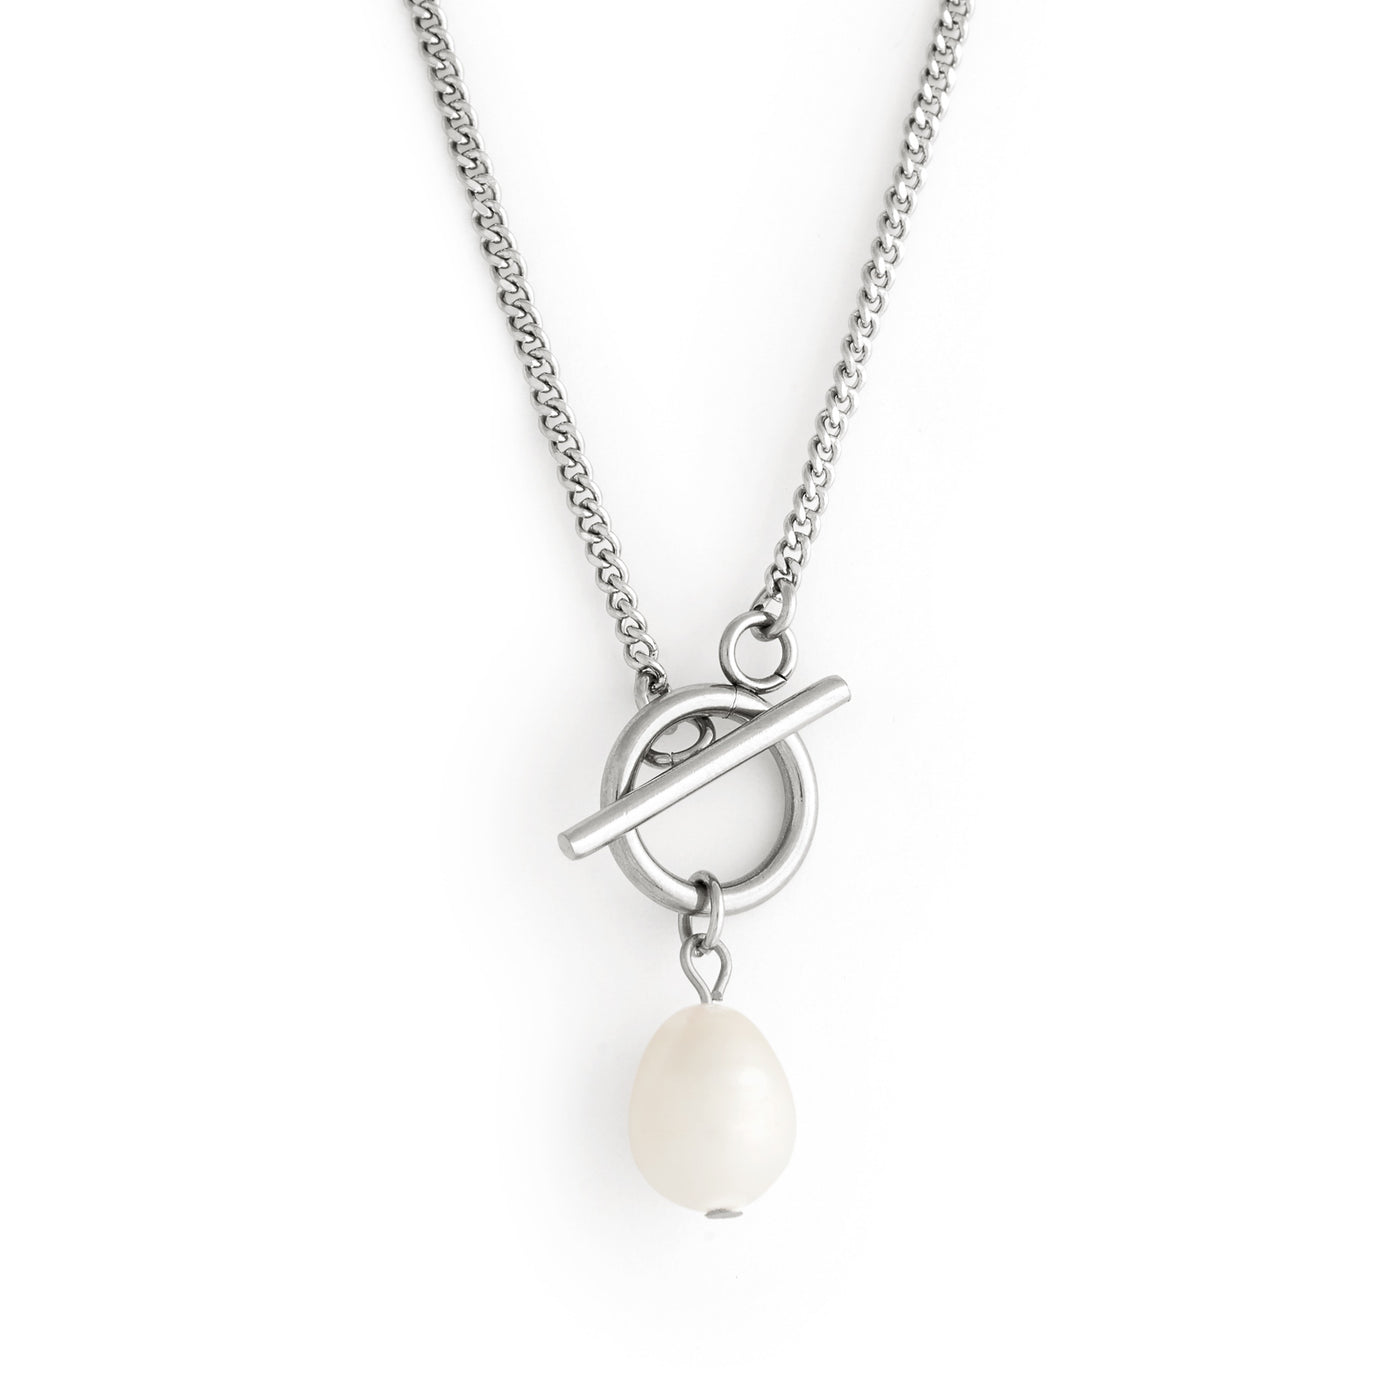 Freshwater Necklace - Silver Freshwater Necklace - Silver